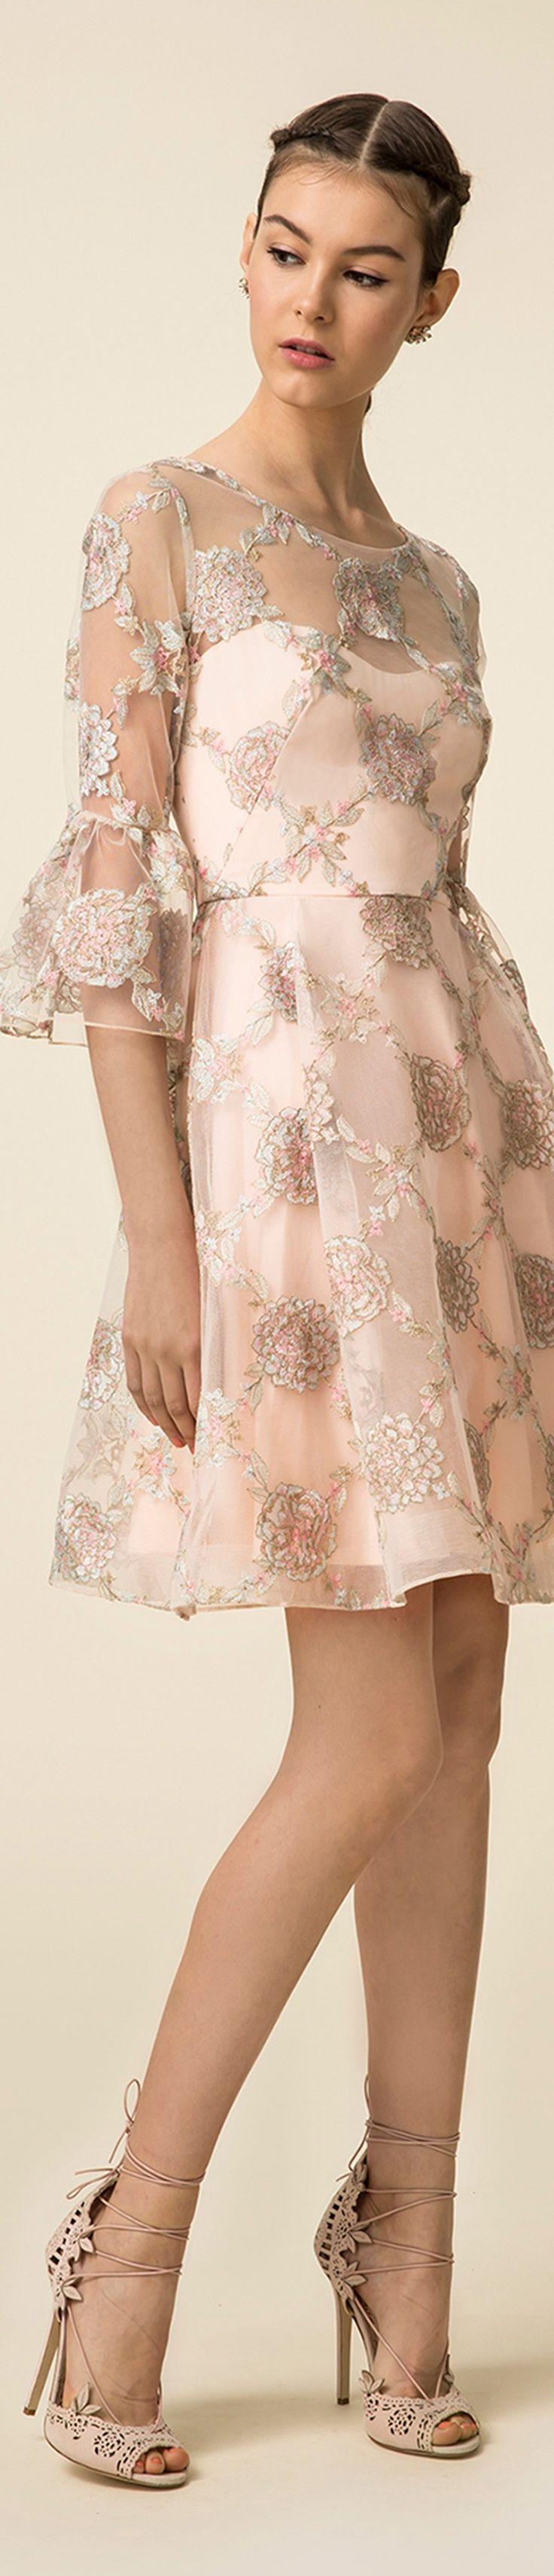 Mariage - Marchesa Notte Spring 2016 Ready-to-Wear Fashion Show